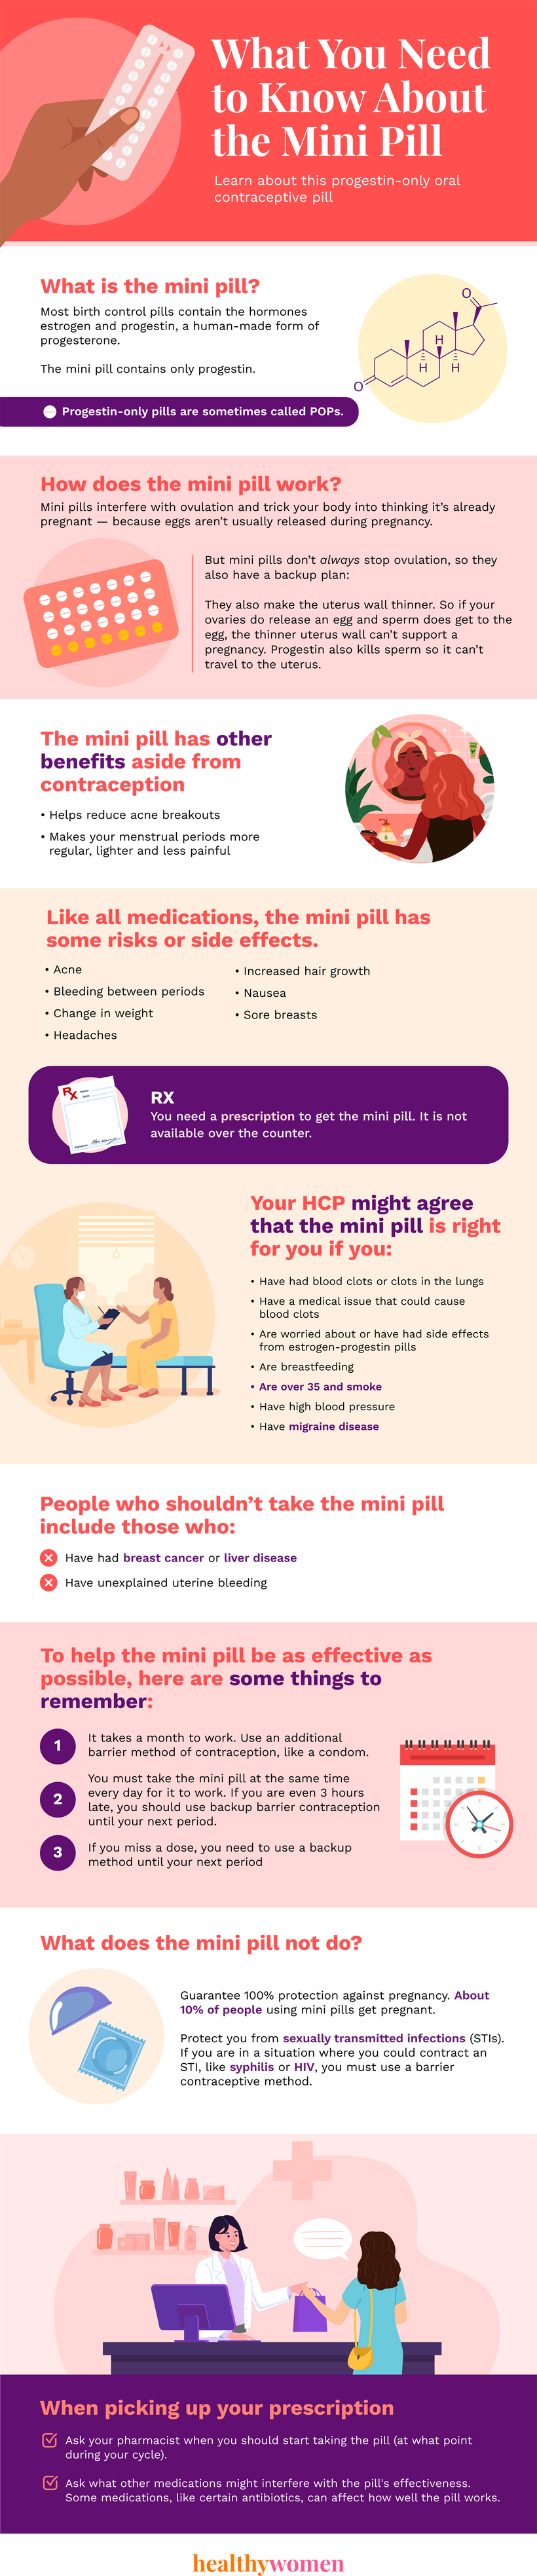 what you need to know about the mini pill infographic